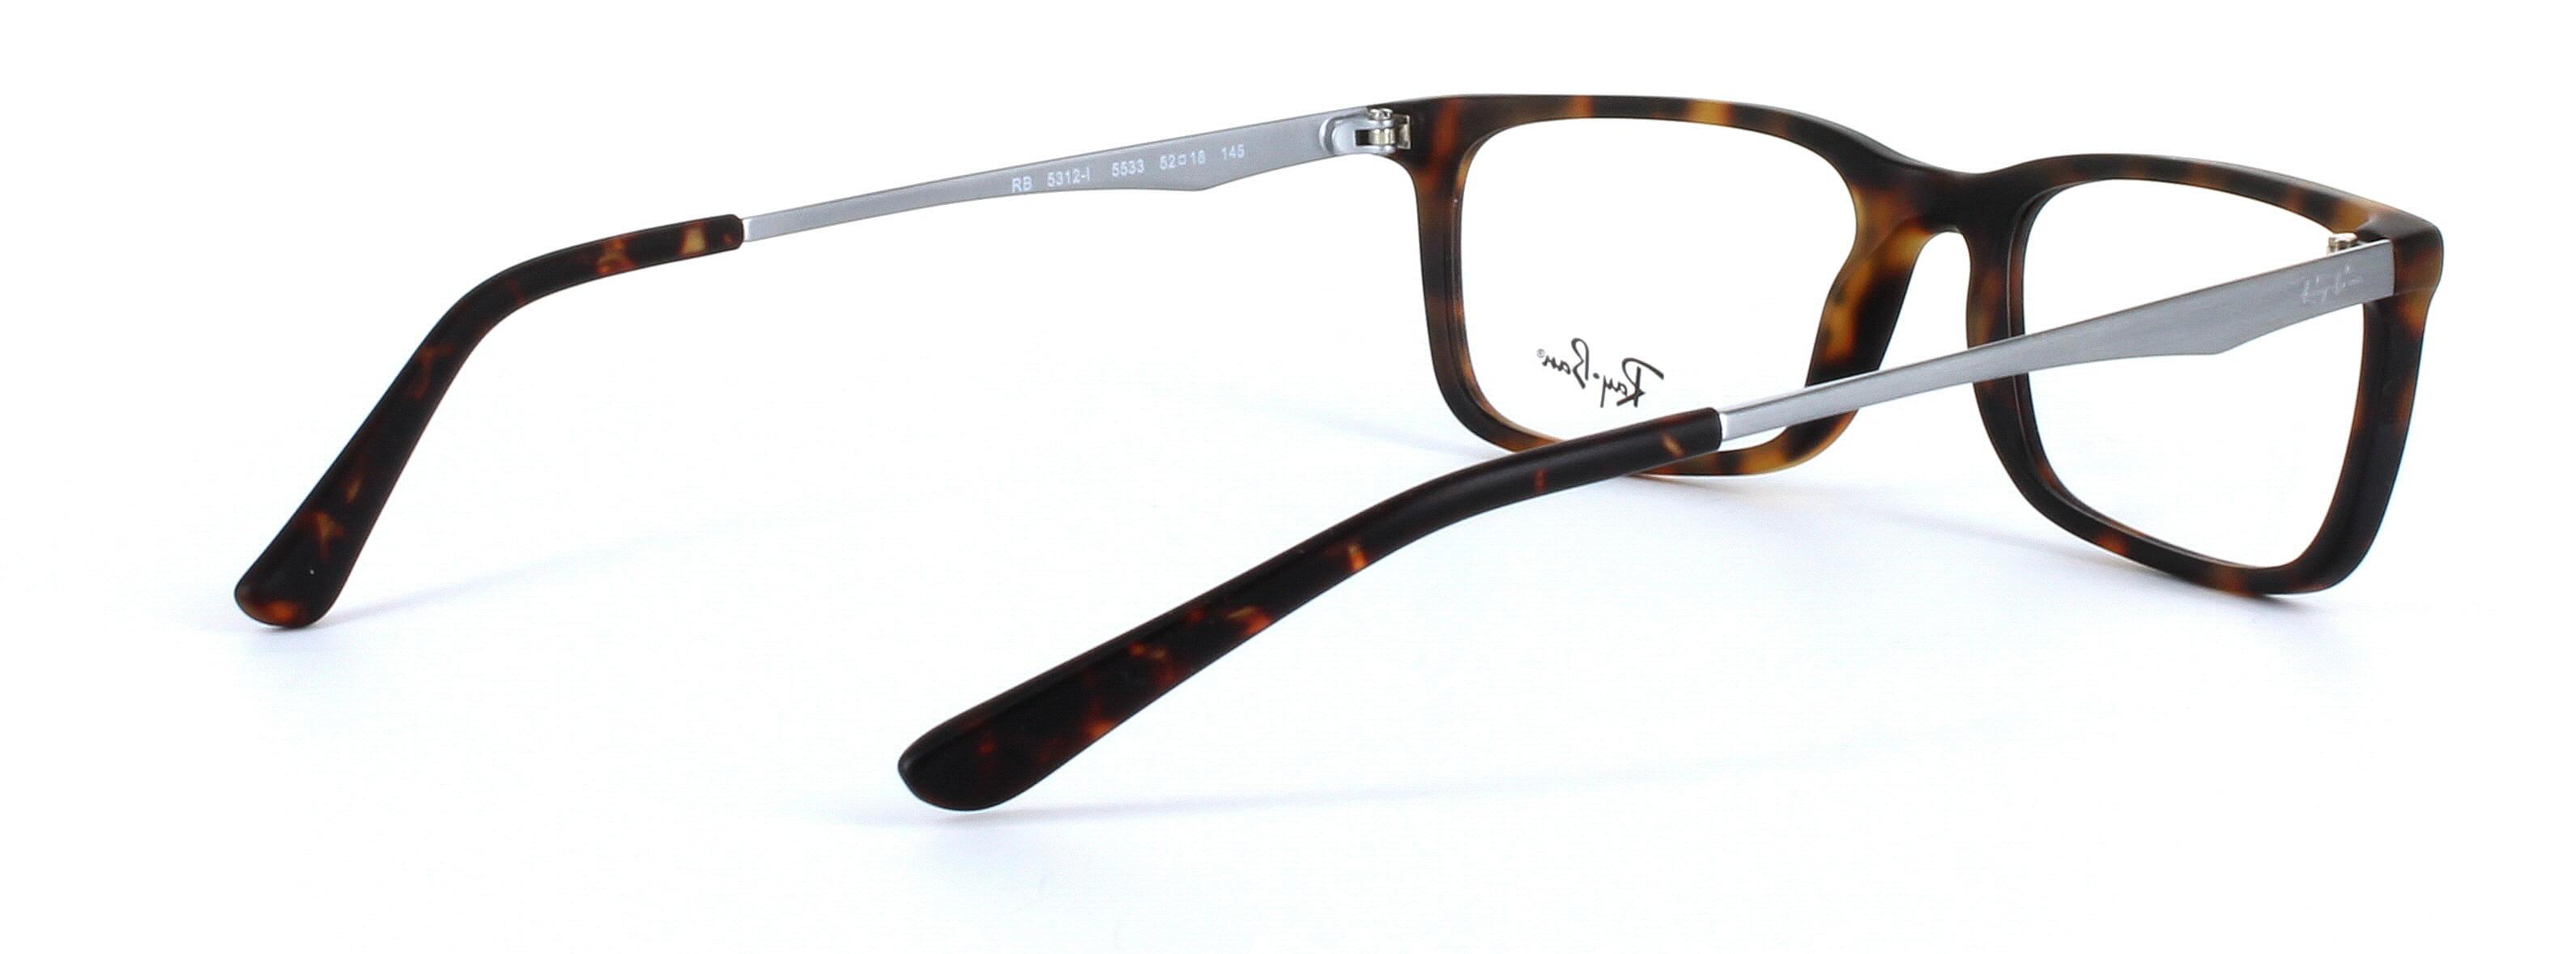 Ray ban 53121 - Unisex tortoise frame with metal arms - image 4